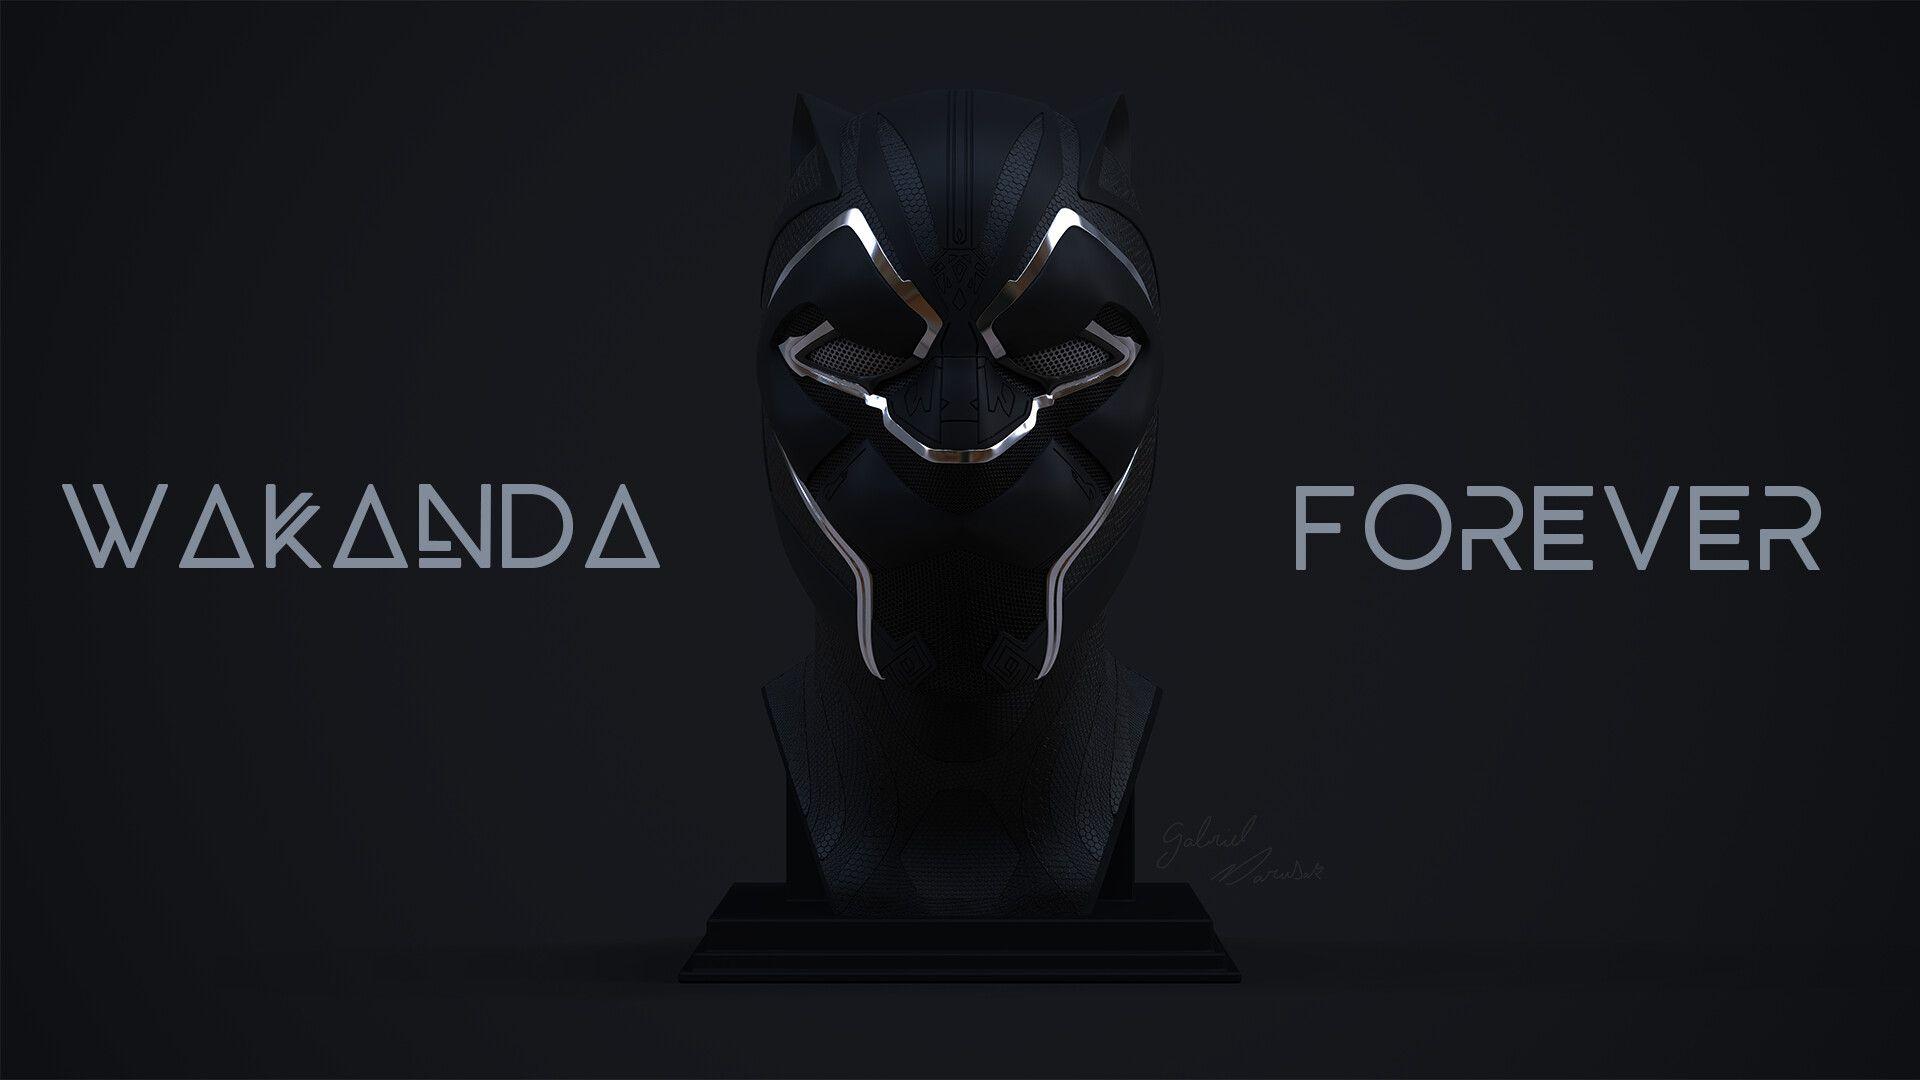 free for mac download Black Panther: Wakanda Forever